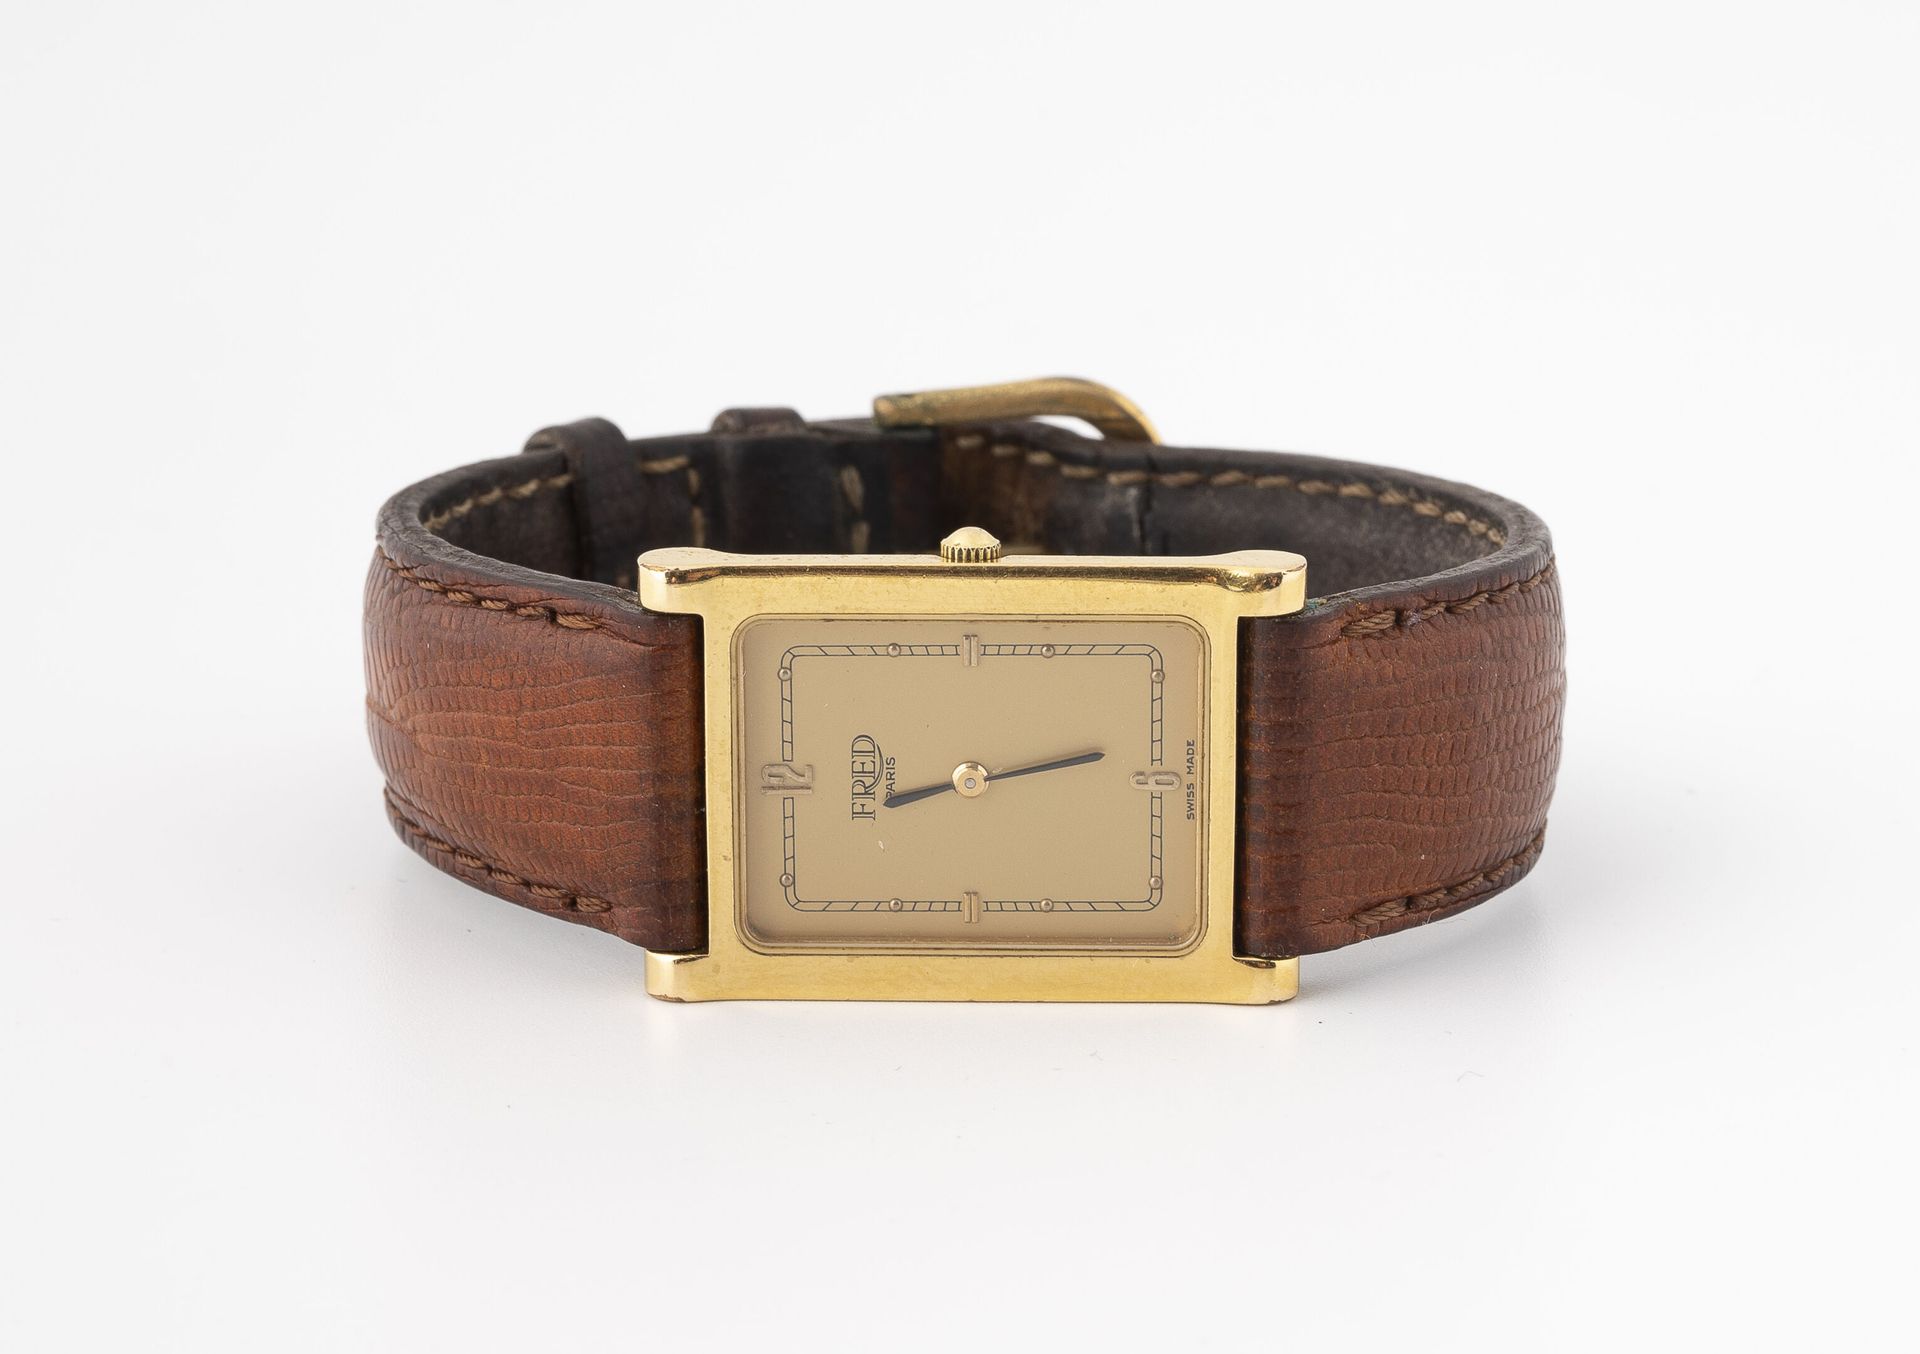 FRED Watch bracelet.
Rectangular case in gilded metal and steel.
Dial with gilde&hellip;